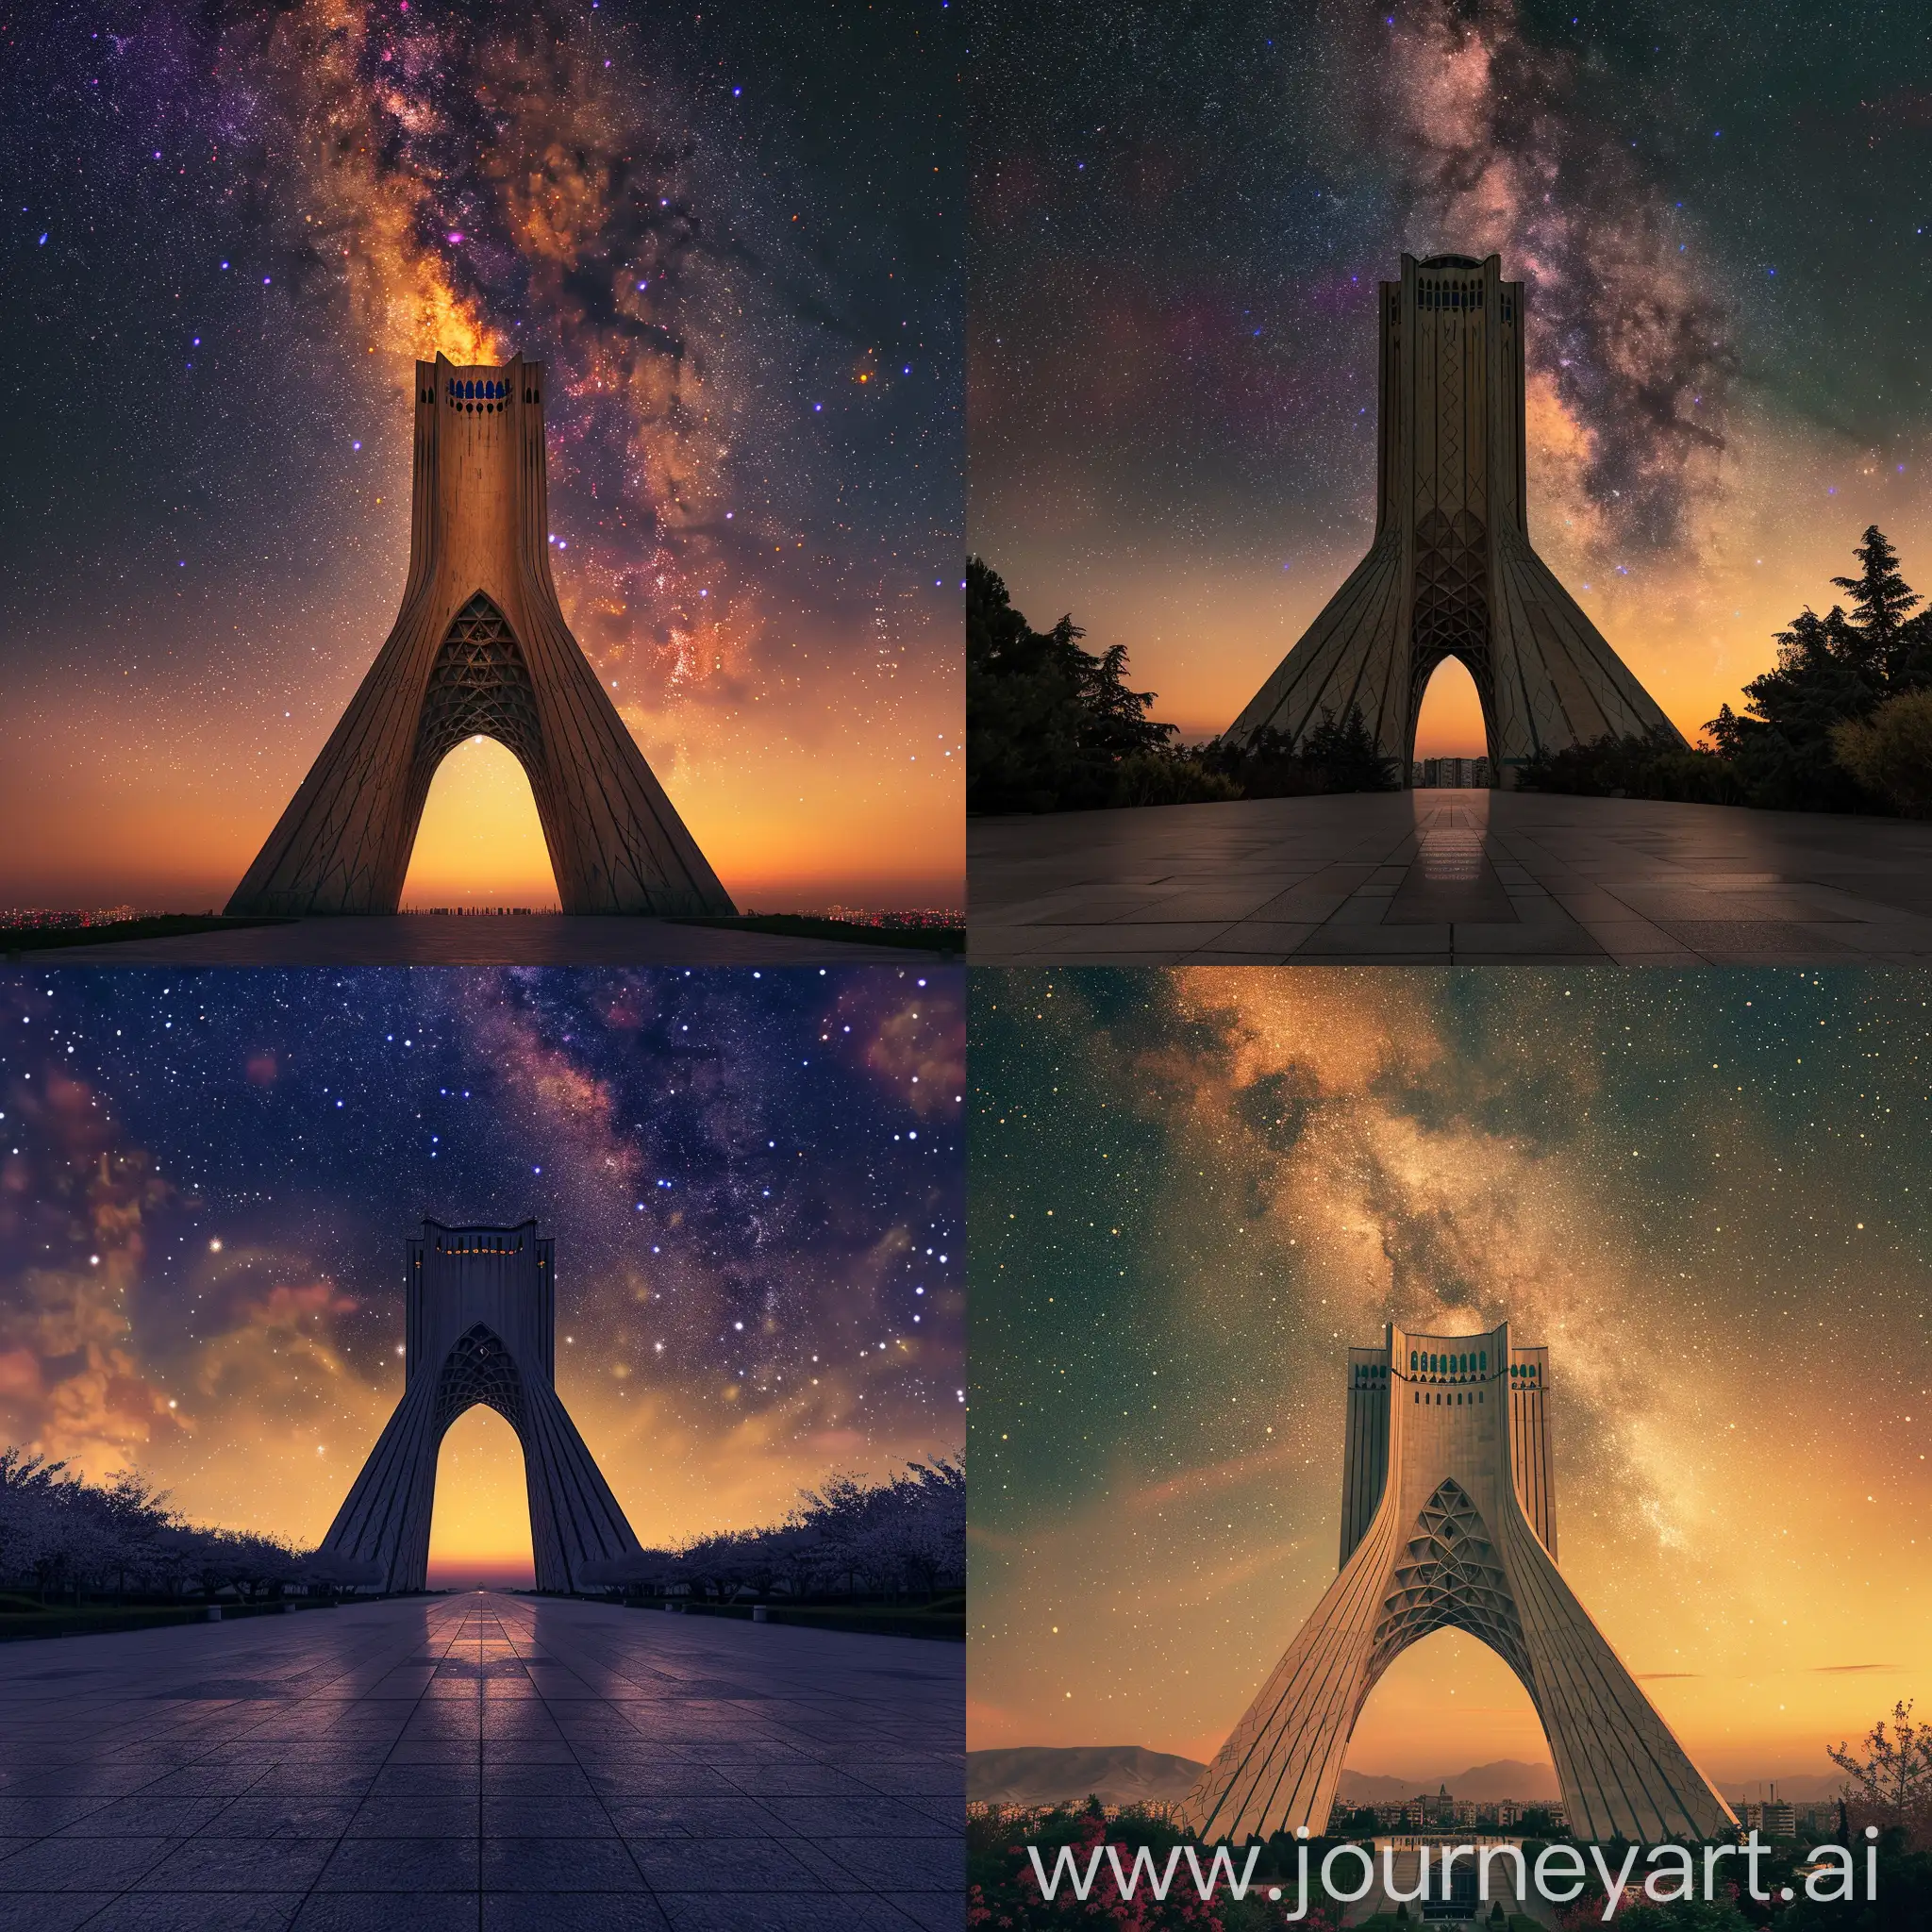 Twilight-View-of-Milad-Tower-in-Tehran-with-Starry-Sky